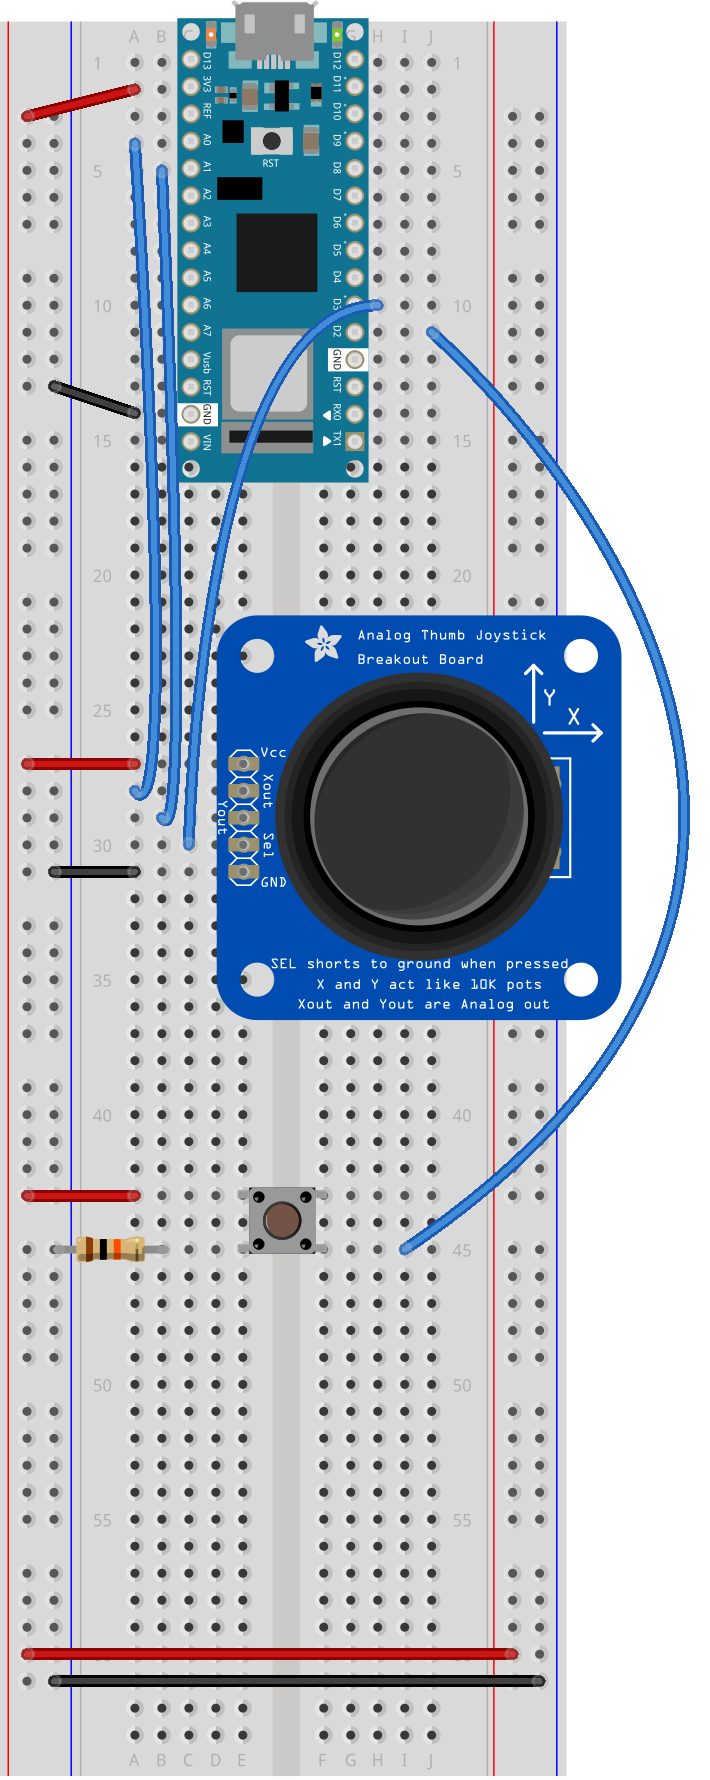 Breadboard drawing of an Arduino Nano connected to a pushbutton and a joystick. The pushbutton is described as in the previous breadboard drawing. The joystick is mounted with its five pins in rows 27 through 31 of the left center section of the breadboard. The body of the joystick is to the right of the pins, and the top pin is therefore the Vcc pin. A black wire connects row 31, the ground pin, to the left side ground bus. A red wire connects row 27, Vcc pin, to the left side voltage bus. A blue wire connects row 28, the X out pin, to the Nano's analog in pin A0. Another wire connects row 29, the Y out, to analog in A1. Yet another wire connects row 30, the Select pin, to digital pin 3.